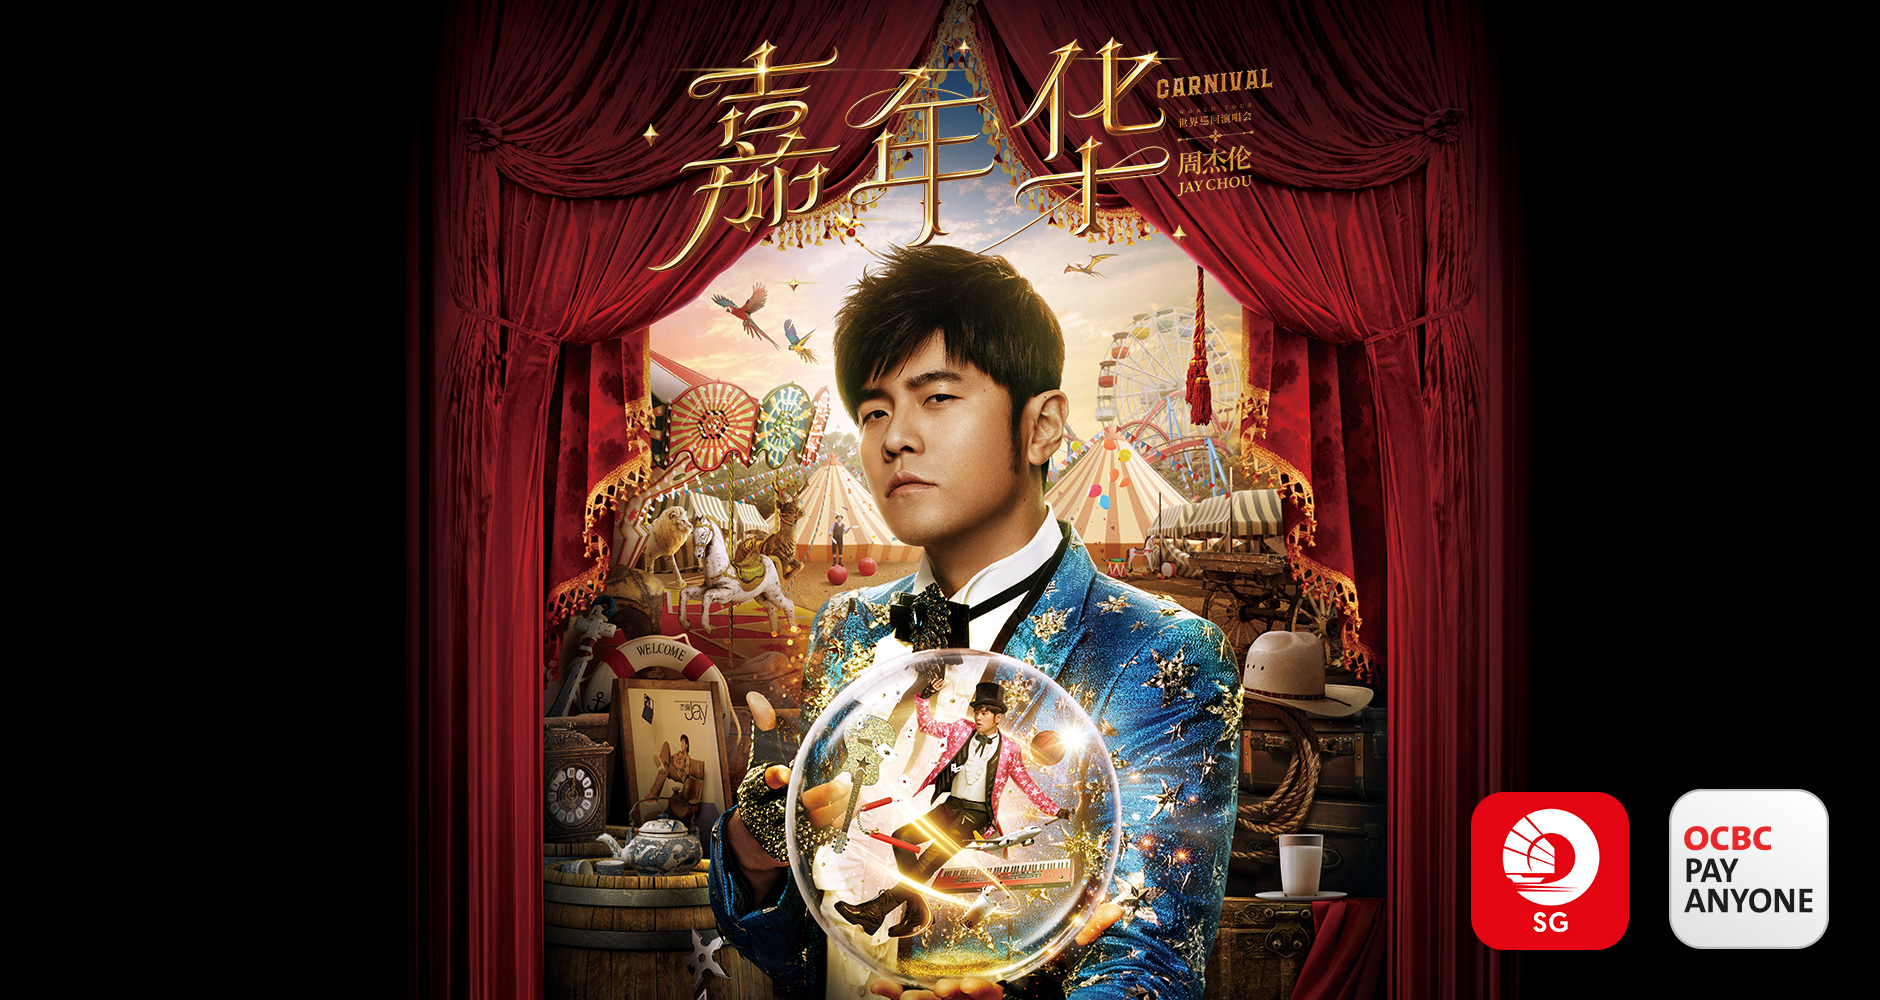 Win a pair of Category 1 tickets to Jay Chou Carnival World Tour (worth S$766)!